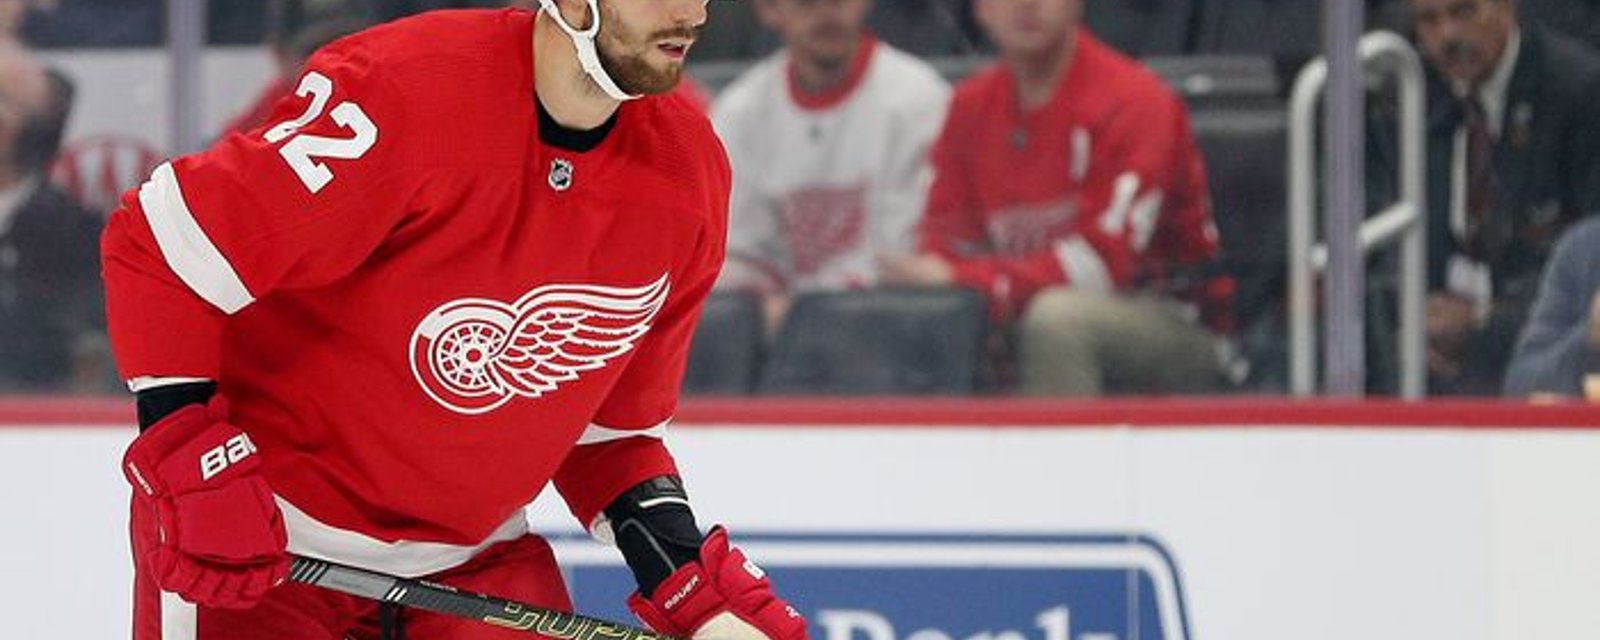 Great news for Wings as Nemeth returns to the lineup tonight in New Jersey